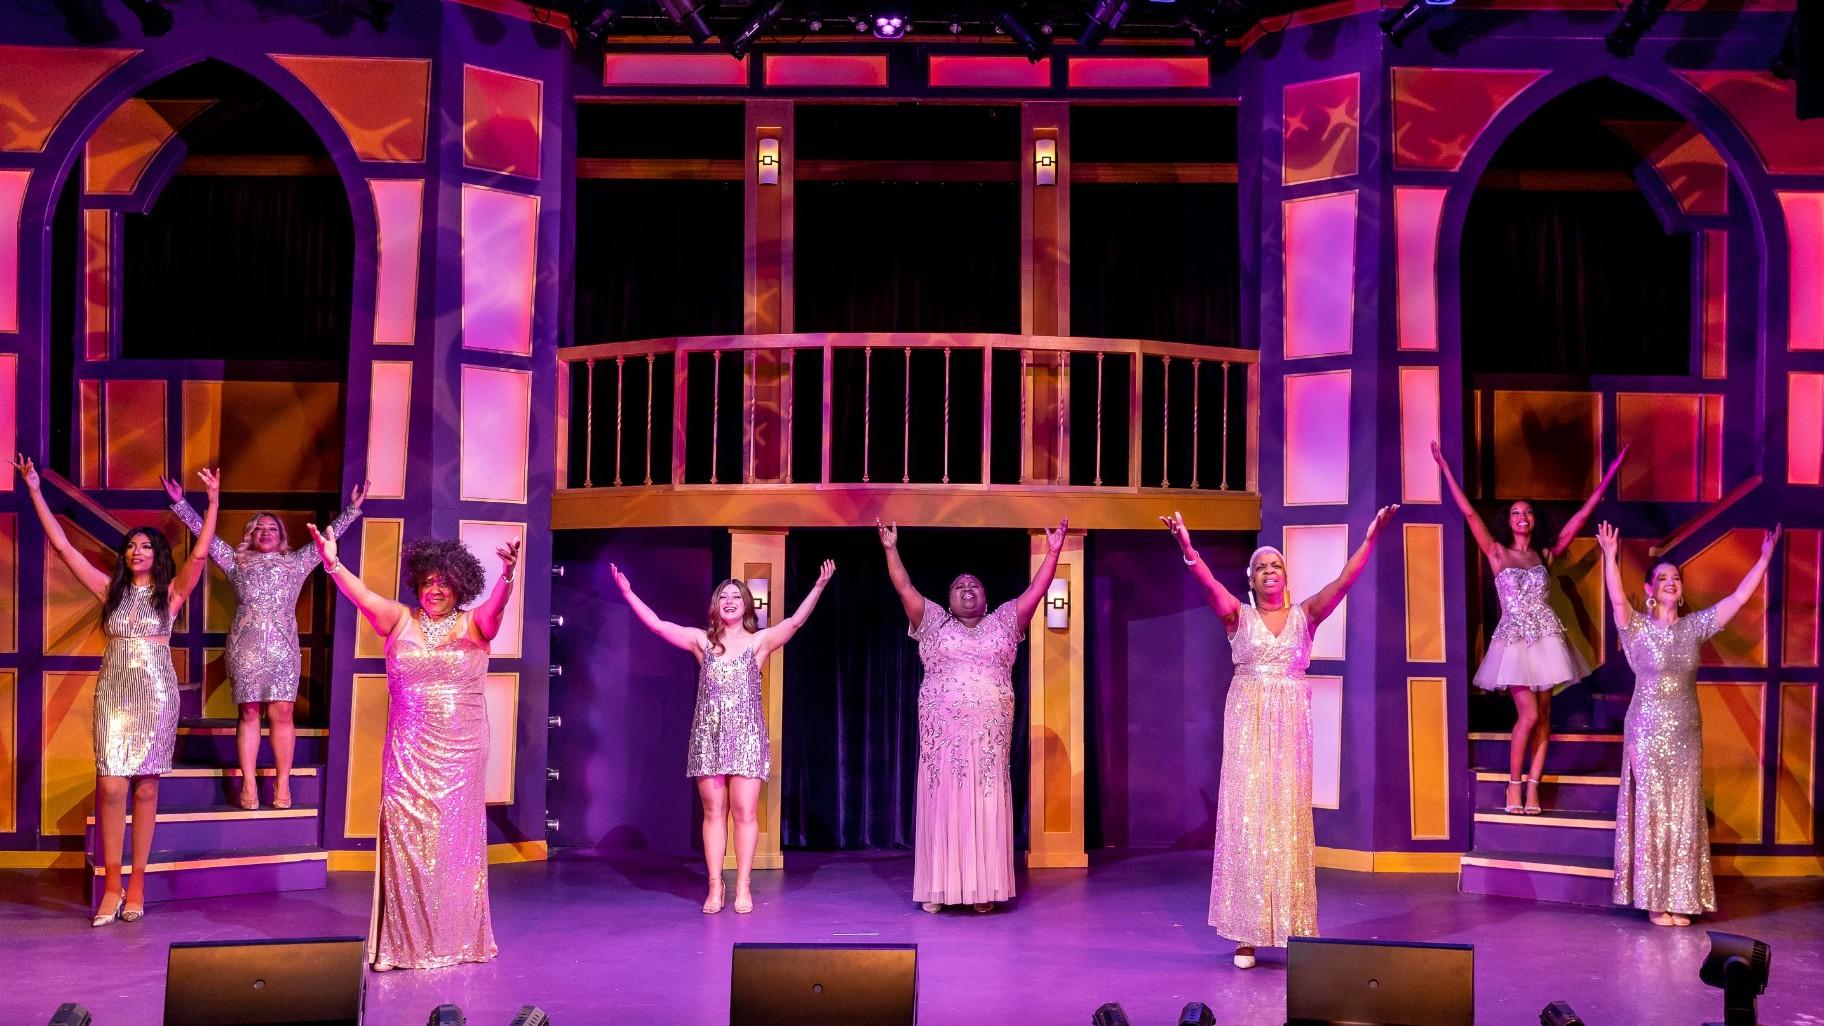 “Women of Soul” runs through March 6 at Mercury Theater Chicago, 3745 N. Southport. (Courtesy of Brett Beiner)